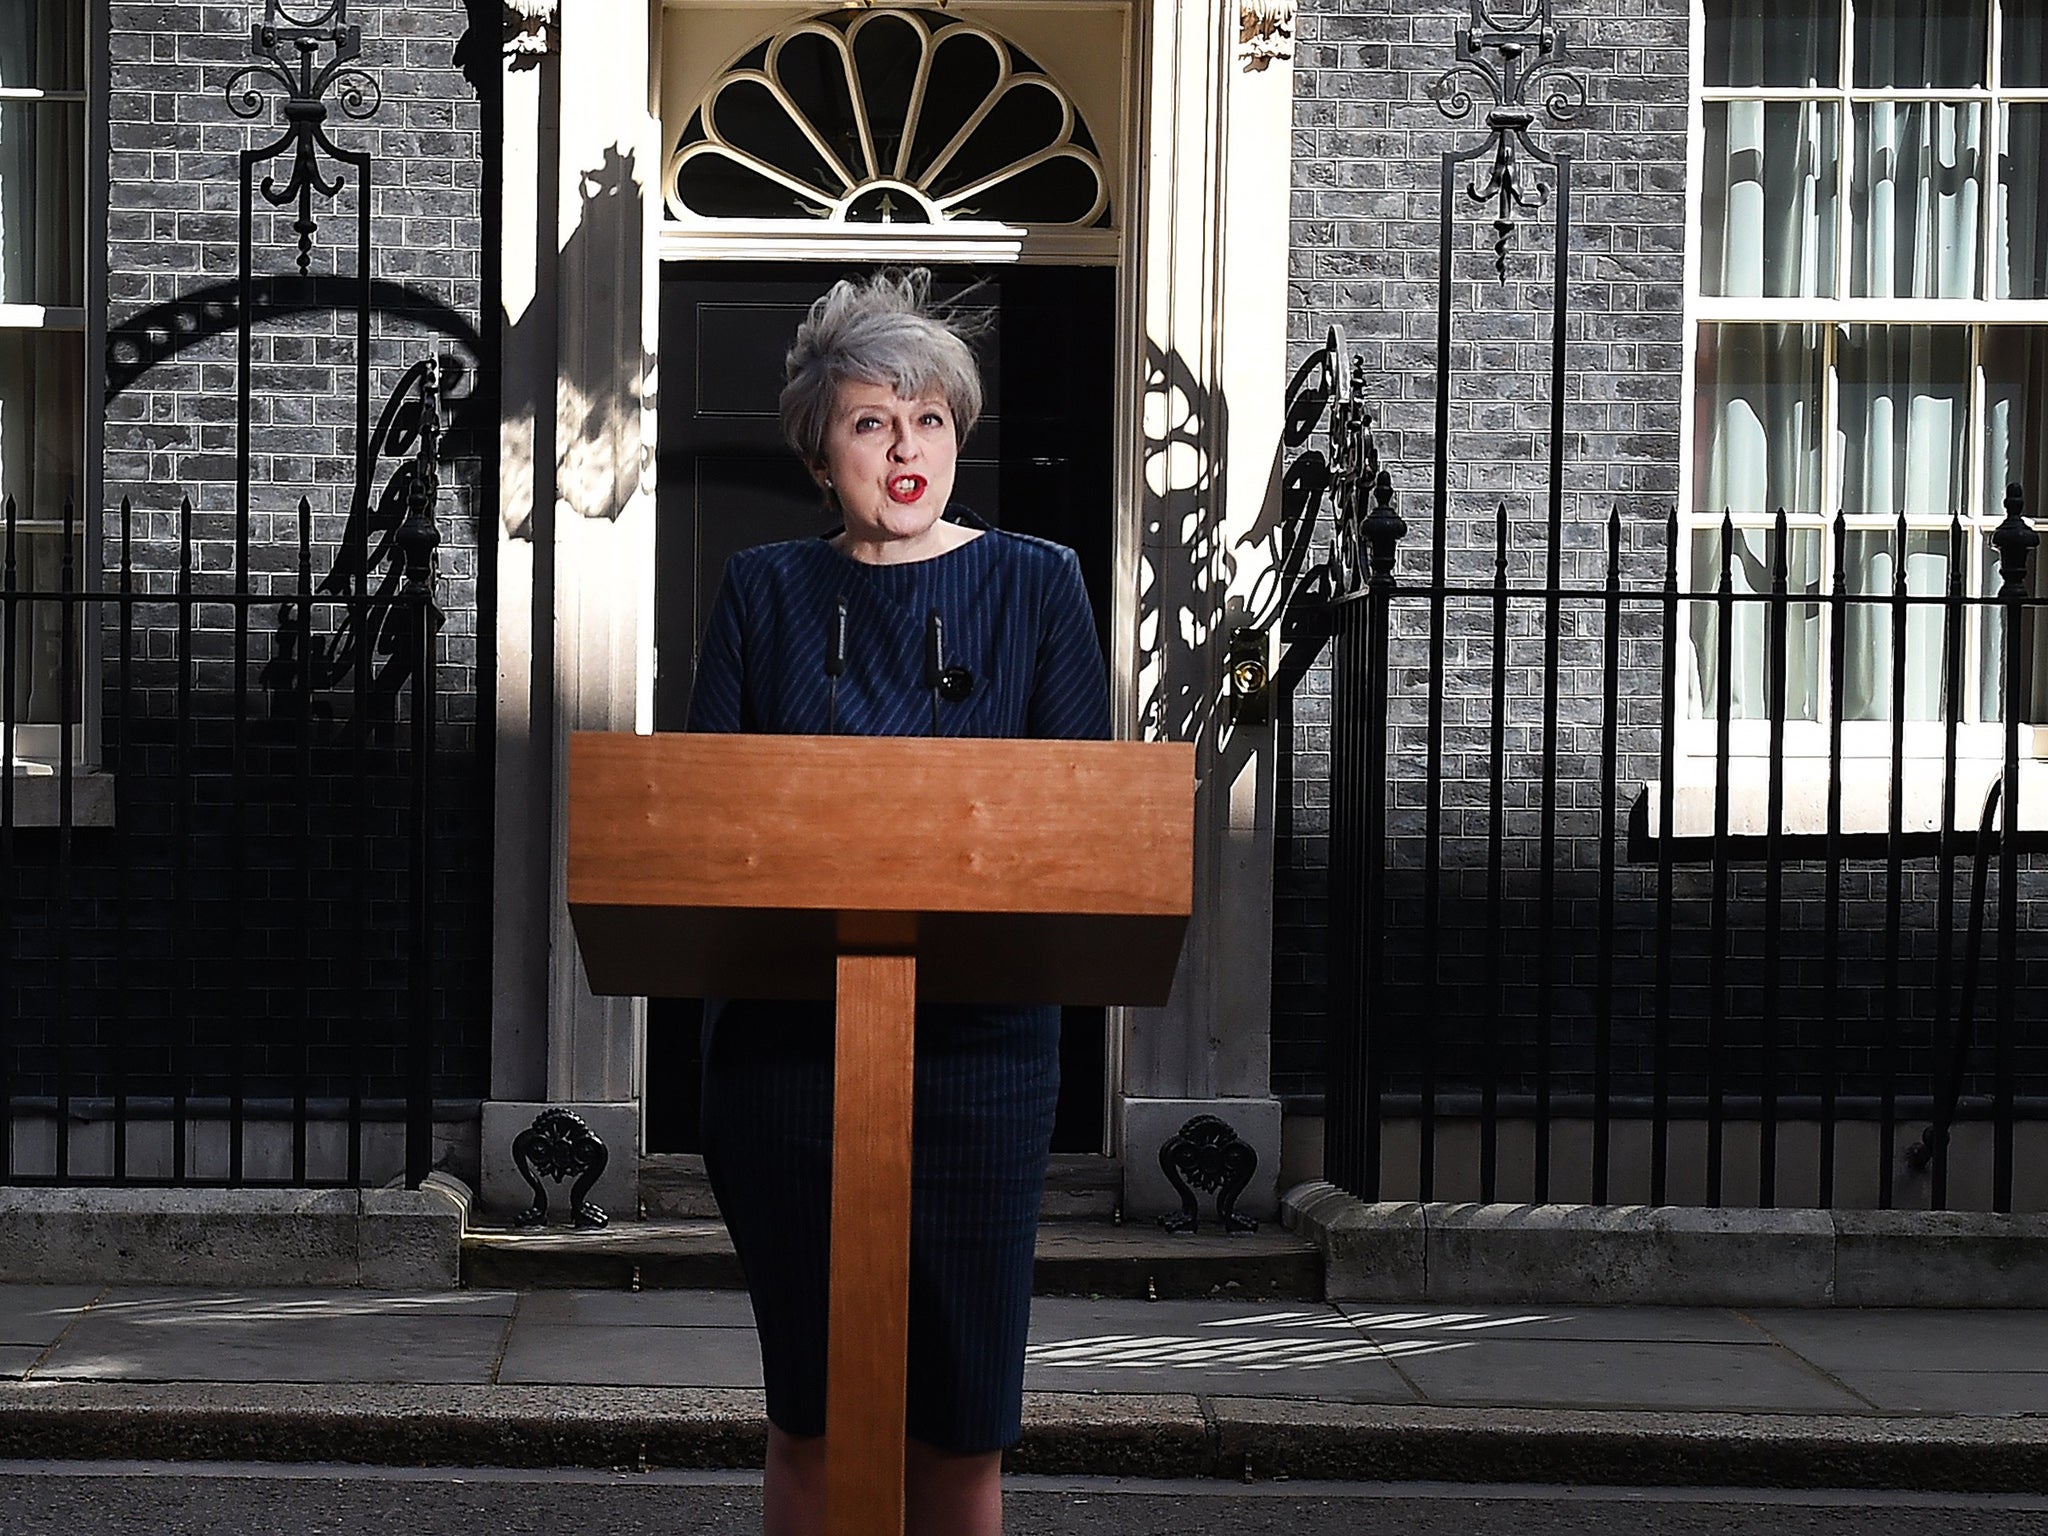 Theresa May announces she will call for a snap general election on the steps of Downing Street